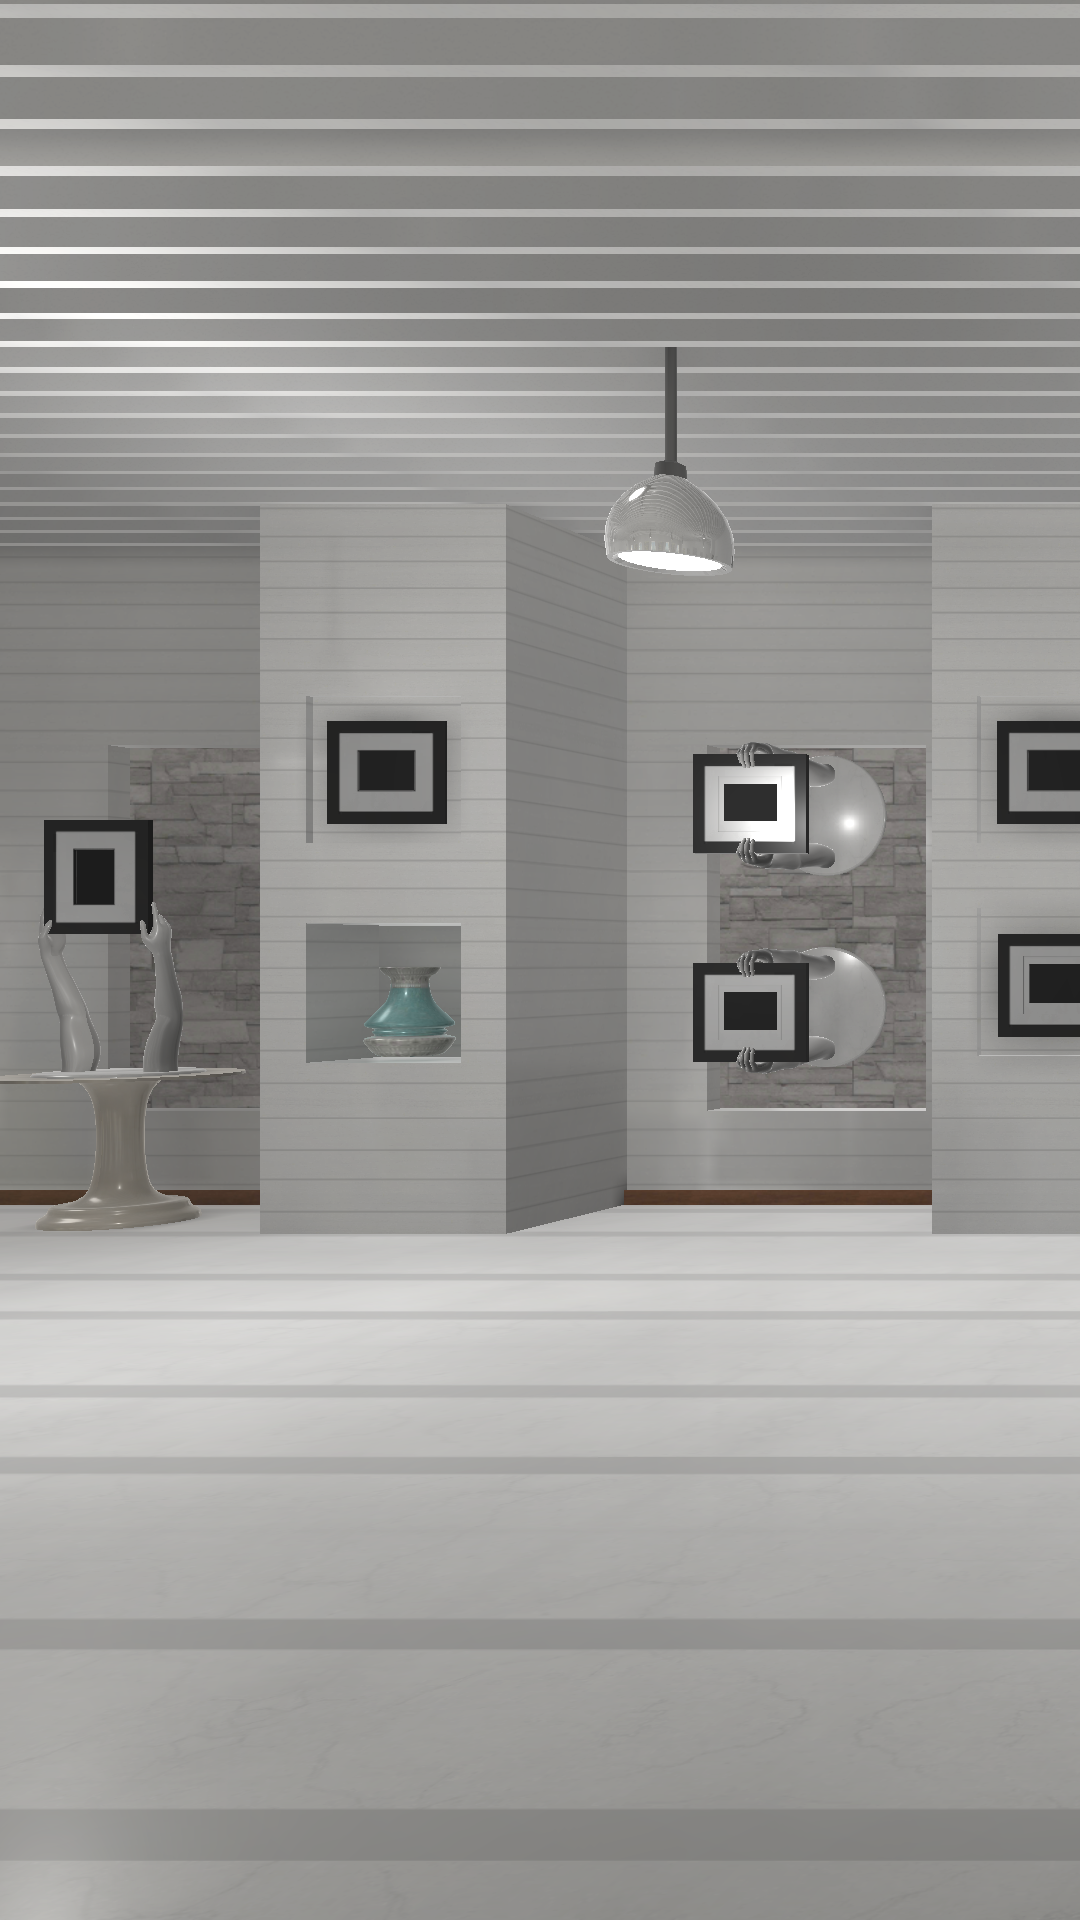 Screenshot 1 of Escape from the modern gallery 1.03